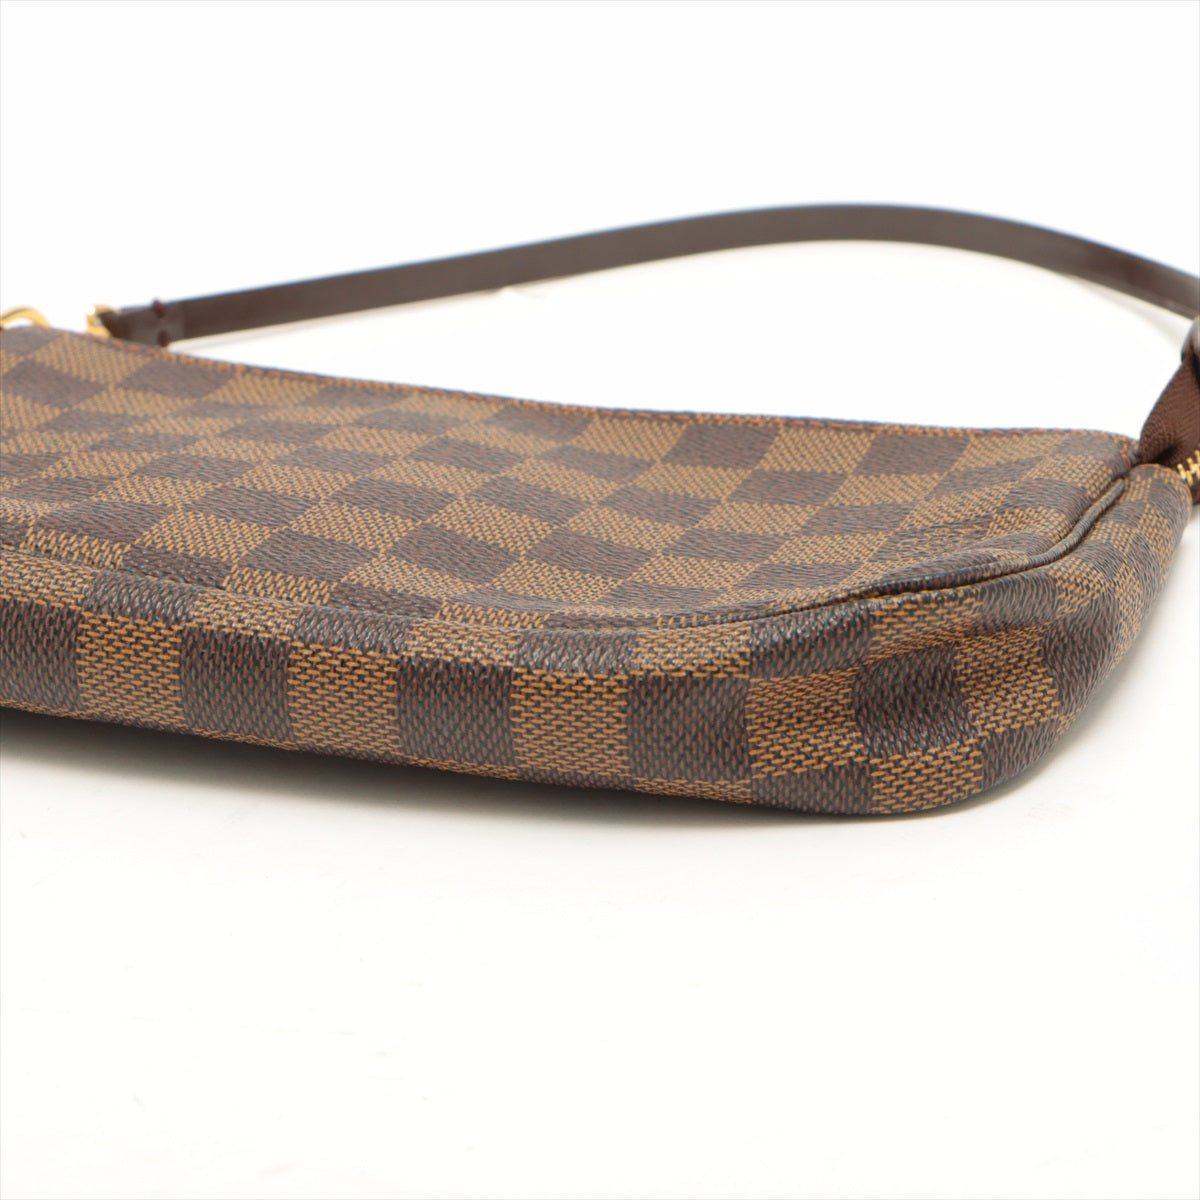 Pochette Félicie Damier Ebene Canvas - Wallets and Small Leather Goods  N40492